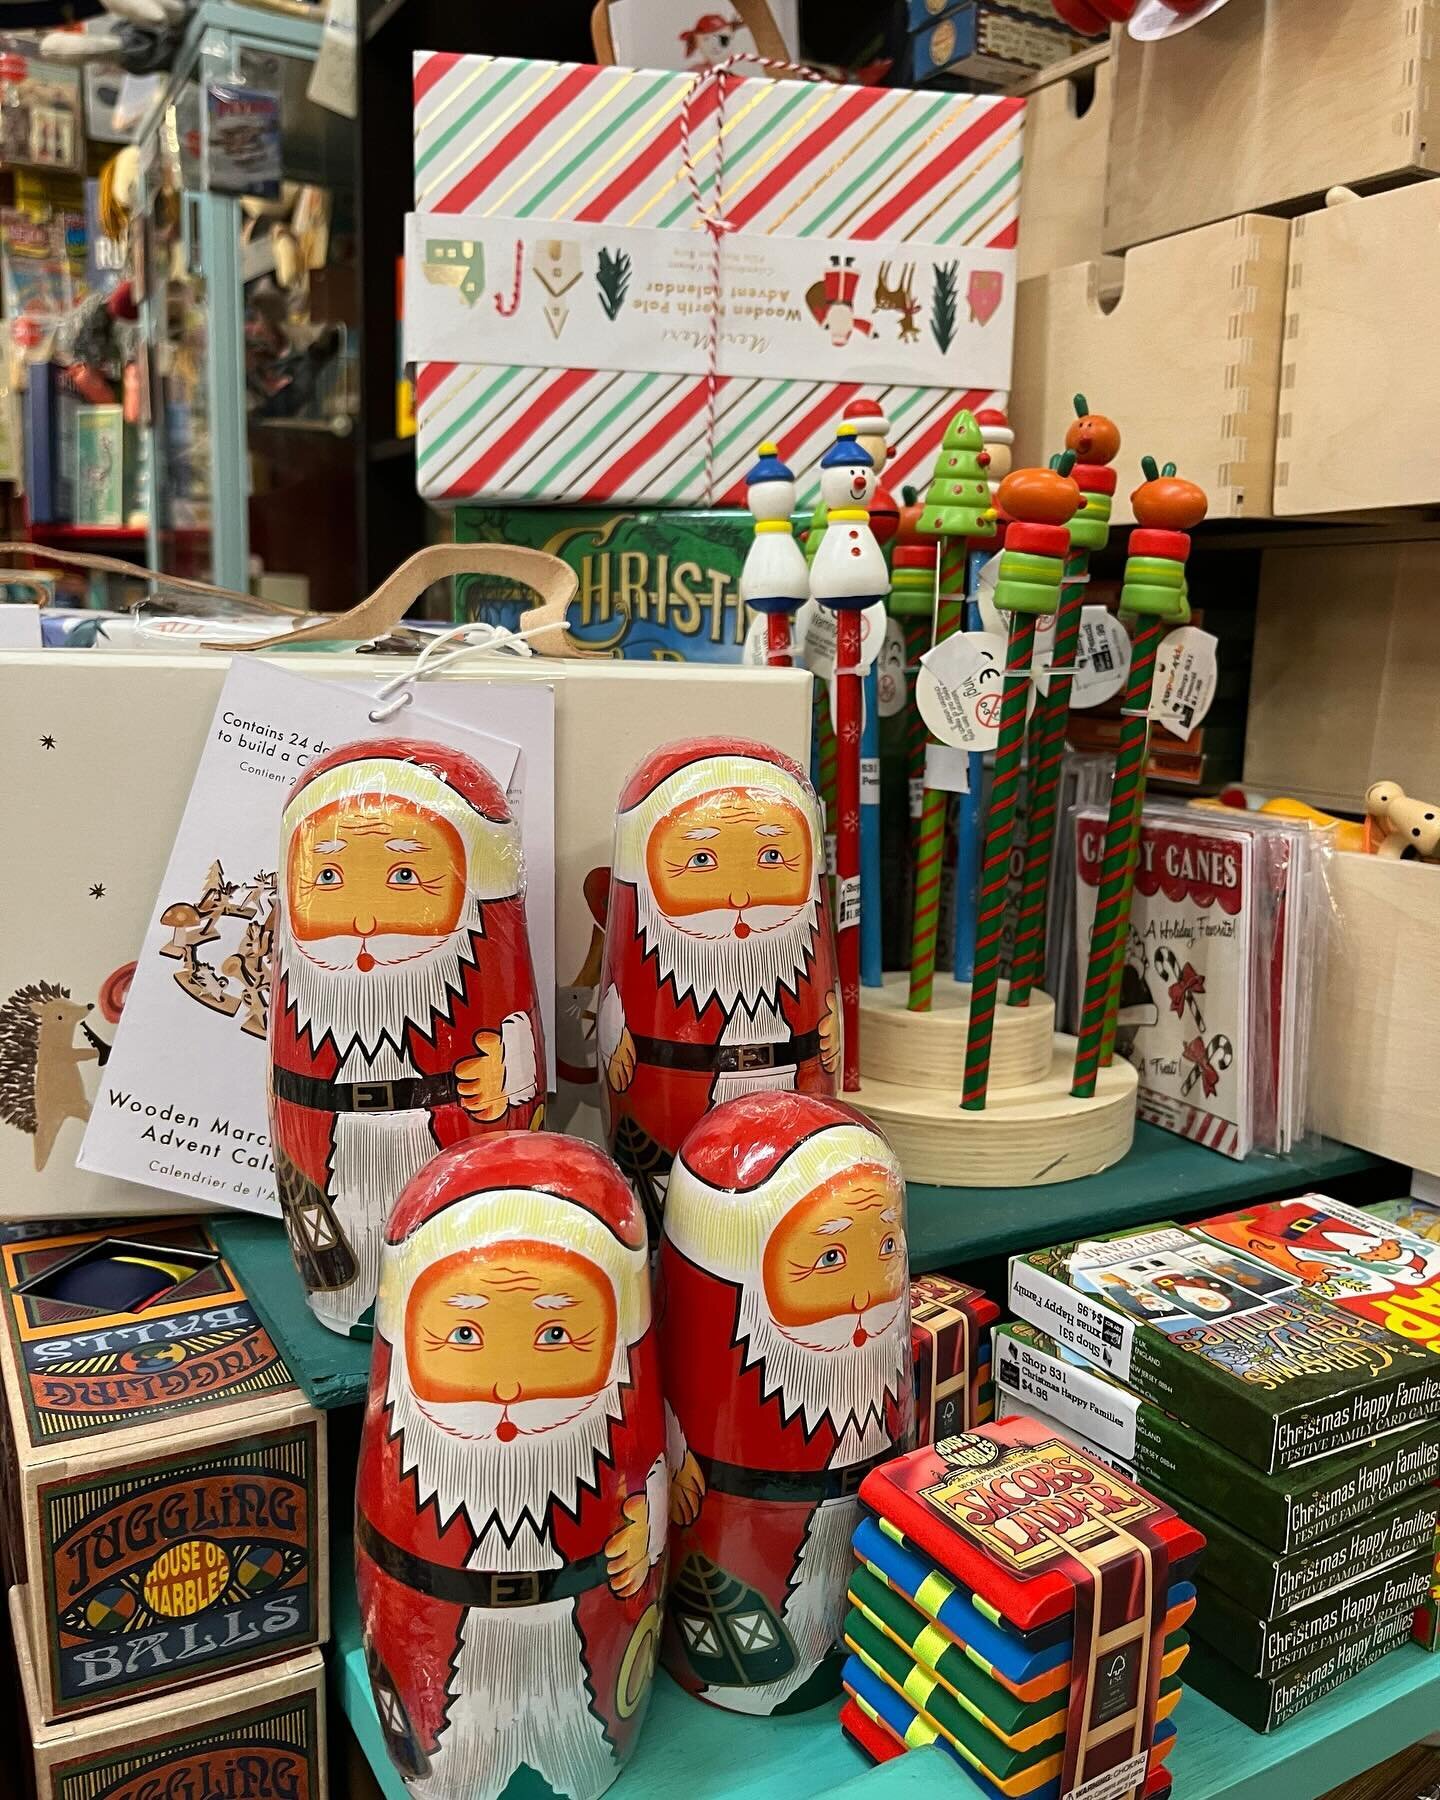 Visit The Vintage Toy Box at Dirty Janes Canberra, a specialist shopping emporium in Fyshwick, for all your Christmas shopping needs. We have a wide selection of Santa Babushkas and other stocking fillers that are sure to bring joy to your loved ones